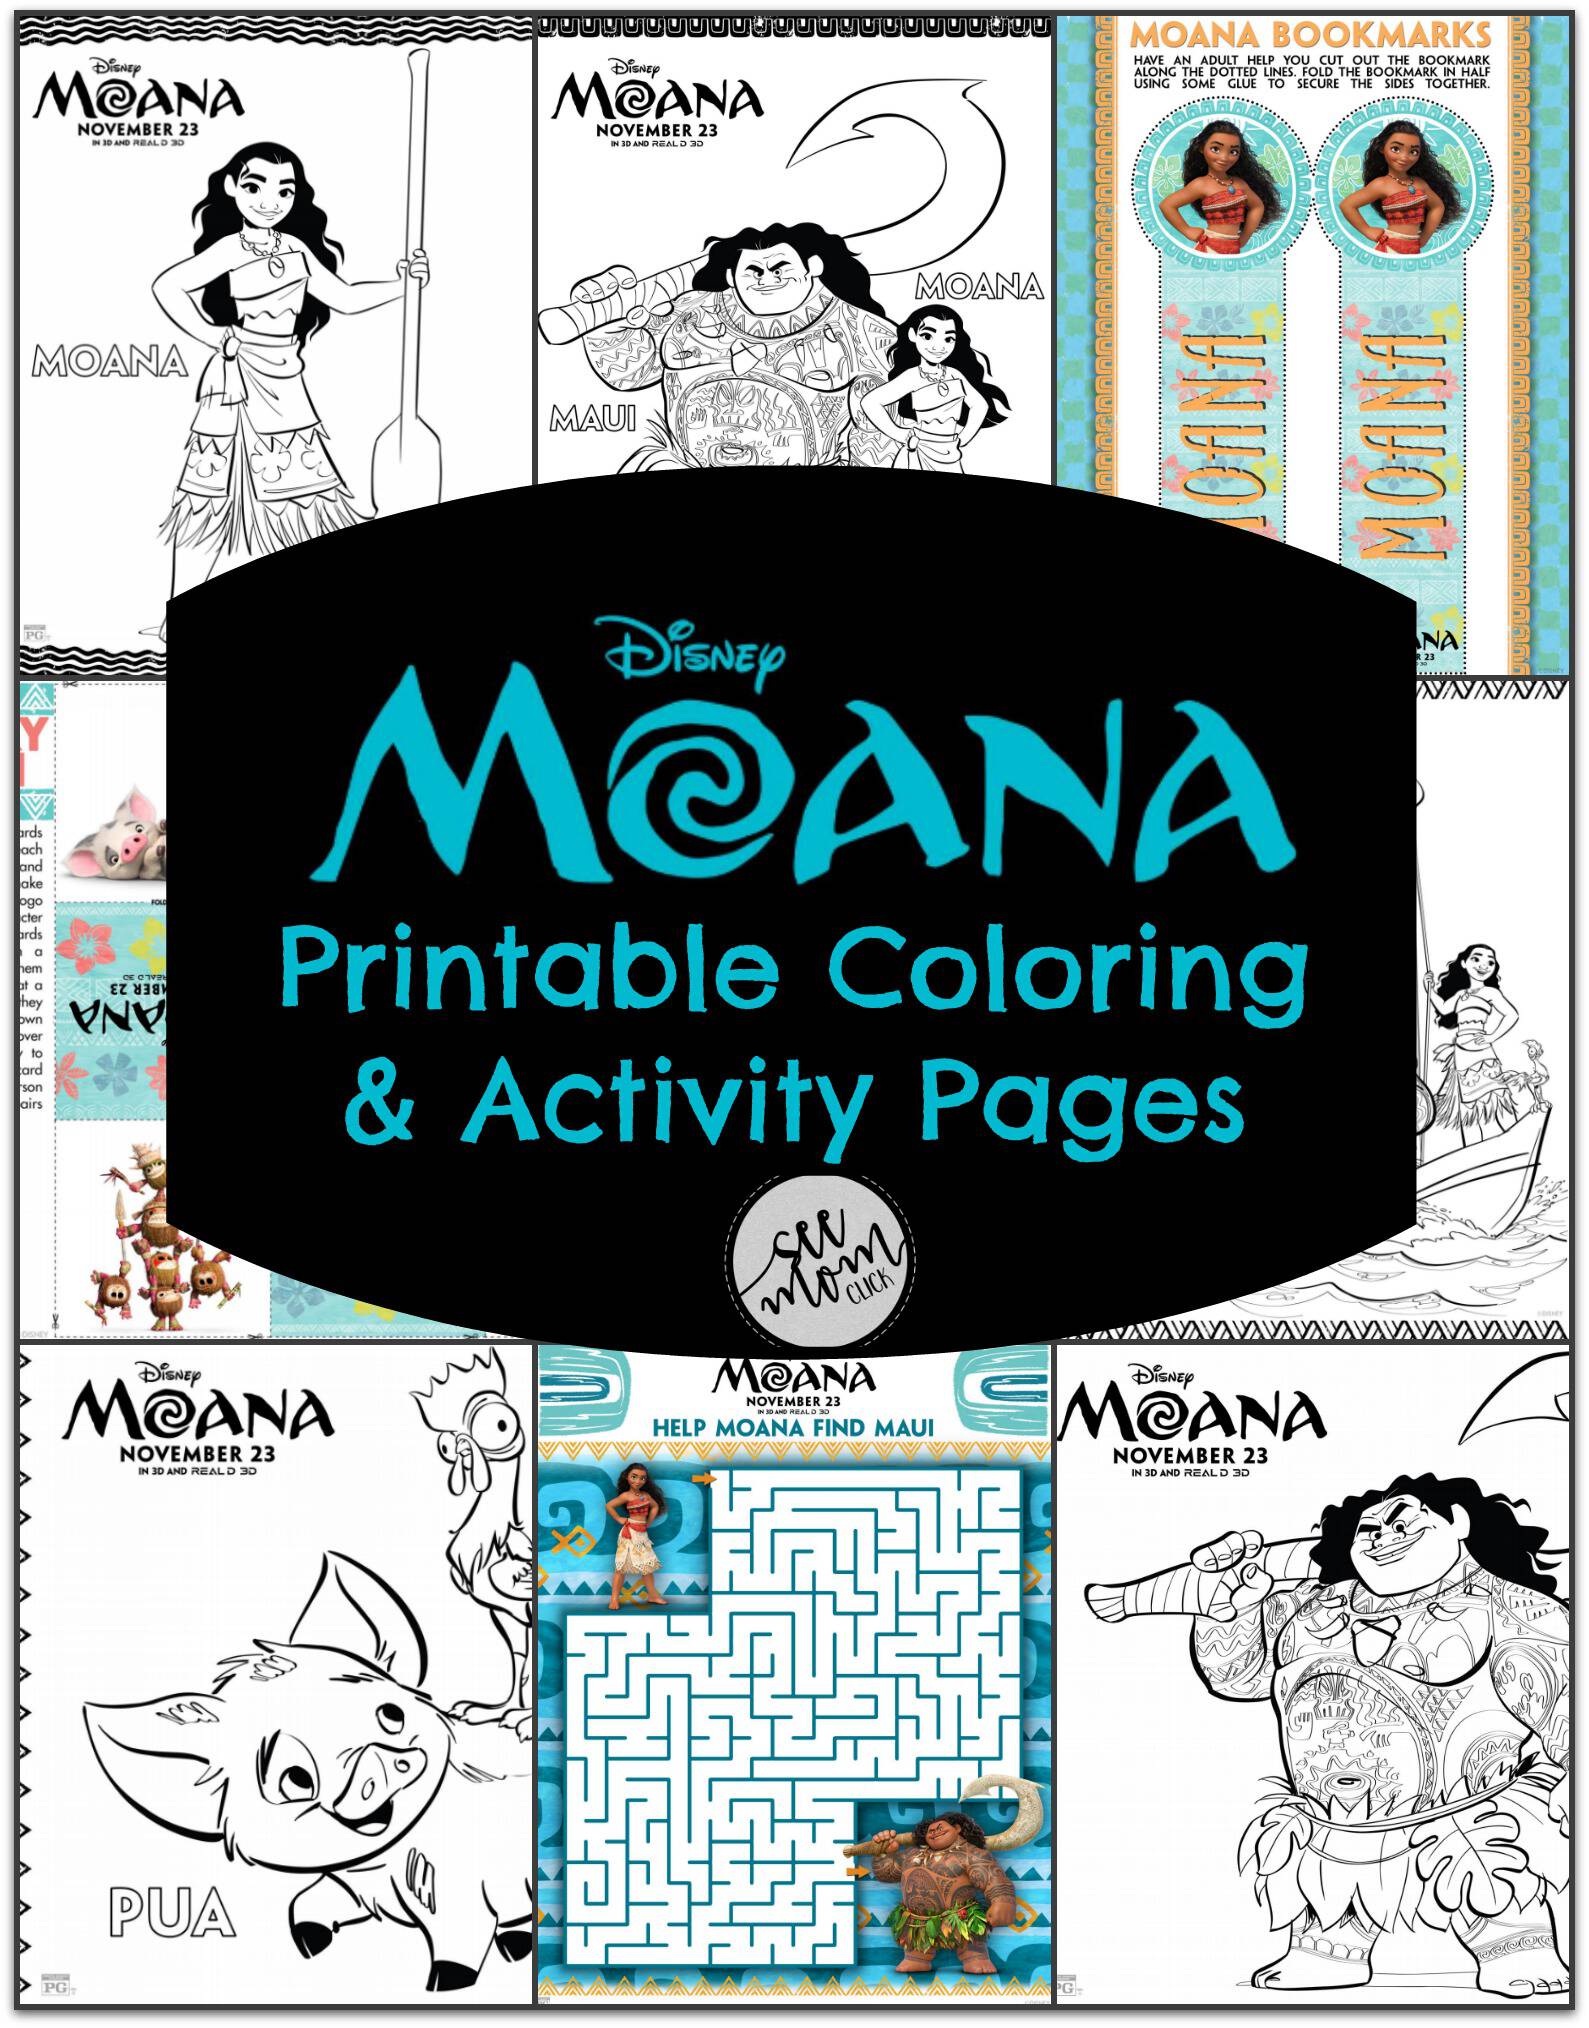 I have some fun new Disney's MOANA printable coloring pages and activity sheets that the kids are going to love! MOANA releases November 23, 2016!